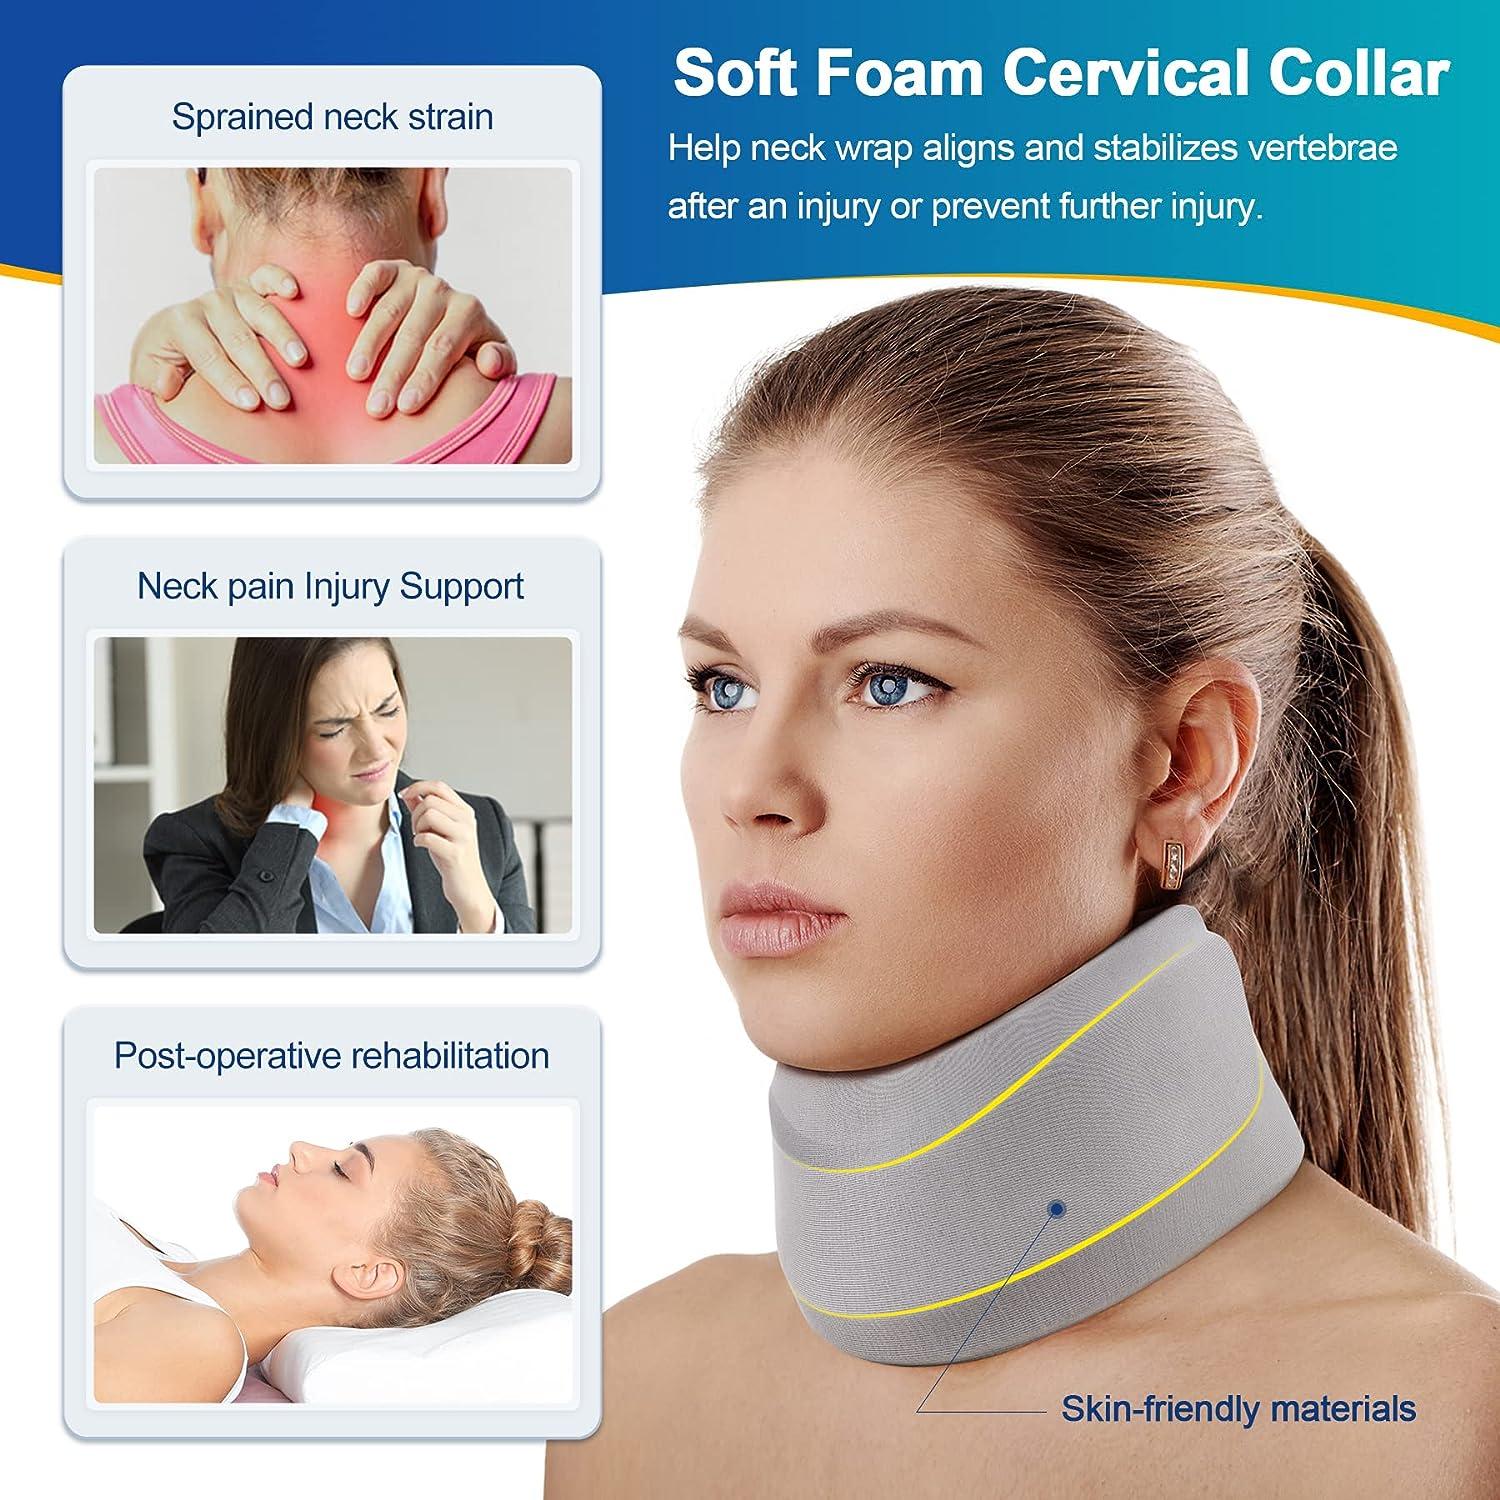  CozyHealth Neck Brace for Neck Pain and Support, Soft Neck  Support Relieves Pain & Pressure in Spine for Women & Men, Wrap Align  Stabilize Vertebrae Foam Cervical Collar for Sleeping (3